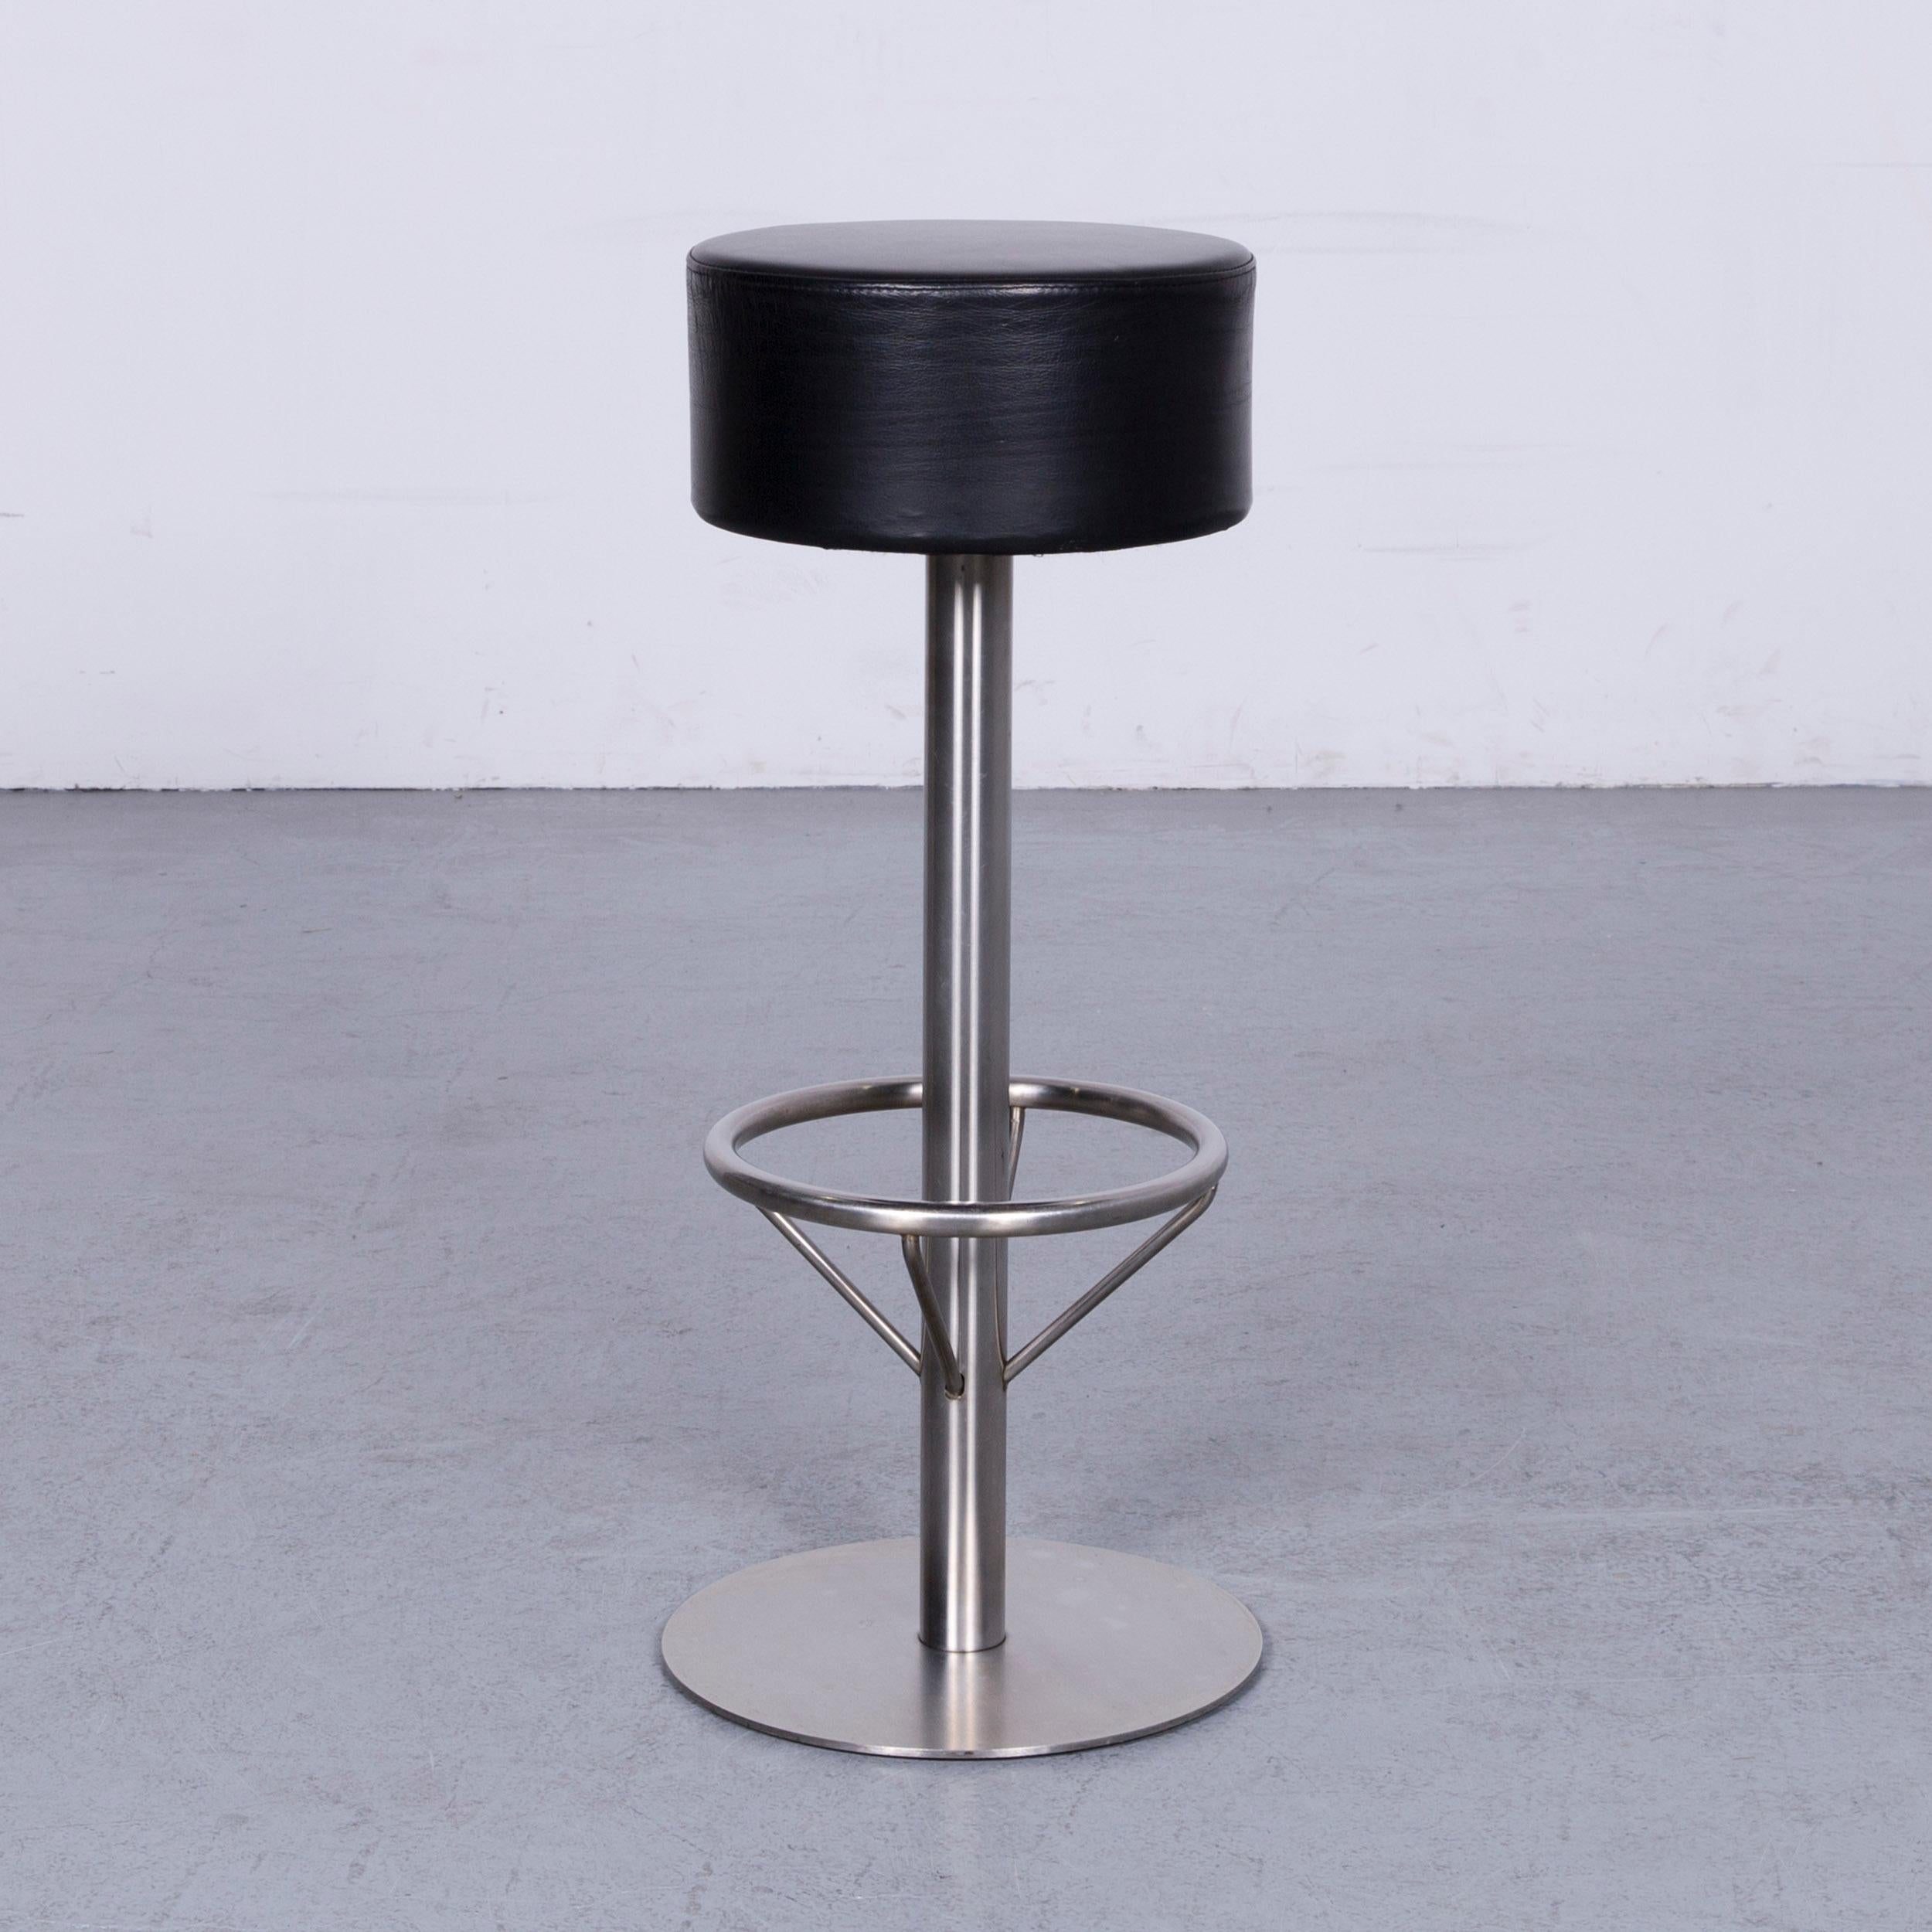 Black colored original Zeus Noto designer leather barstool, in a minimalistic and modern design, made for pure comfort and style.